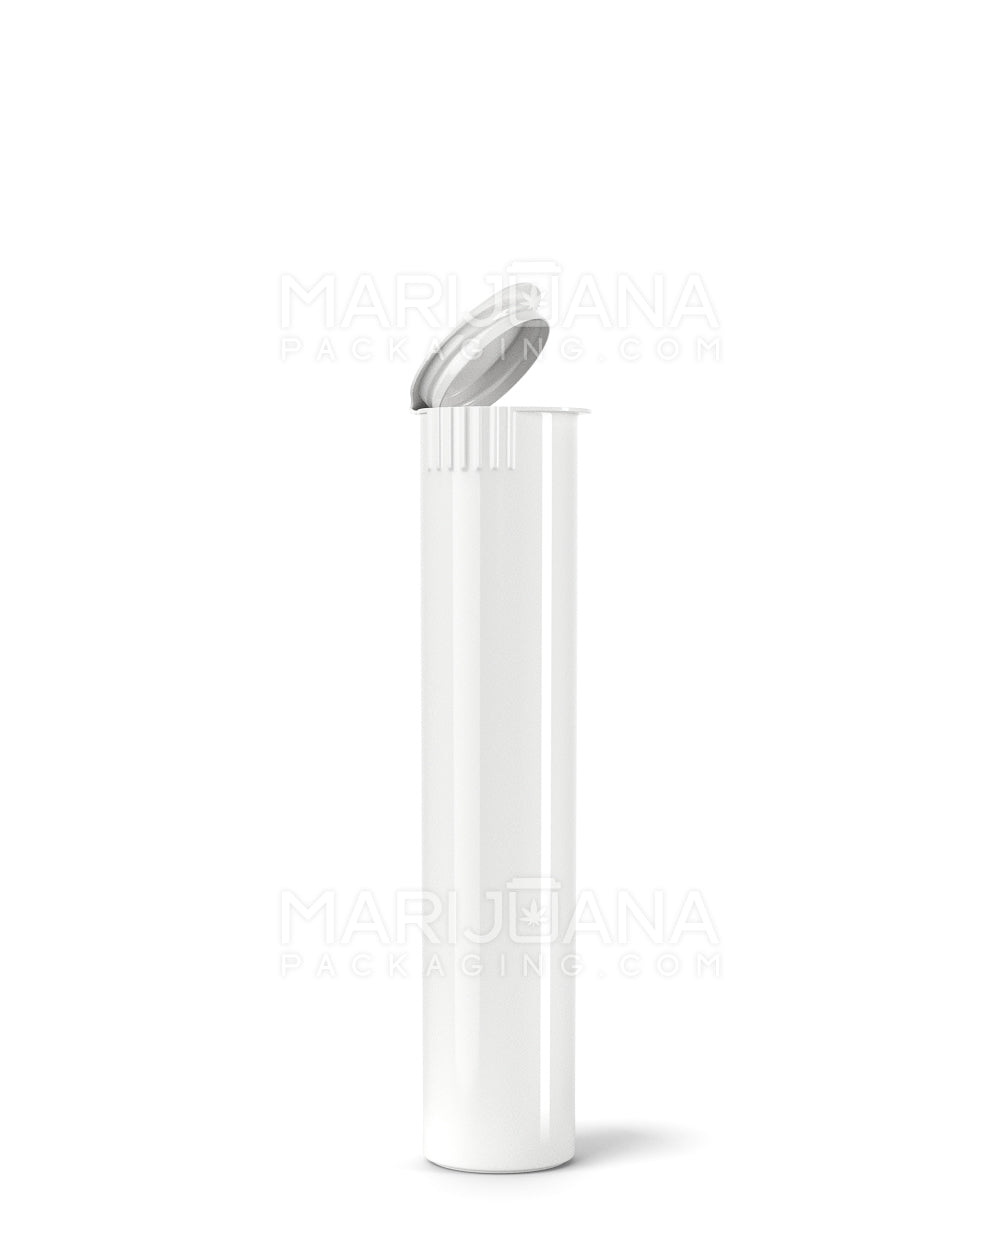 Child Resistant | Pop Top Opaque Plastic Pre-Roll Tubes | 90mm - White - 1000 Count - 1